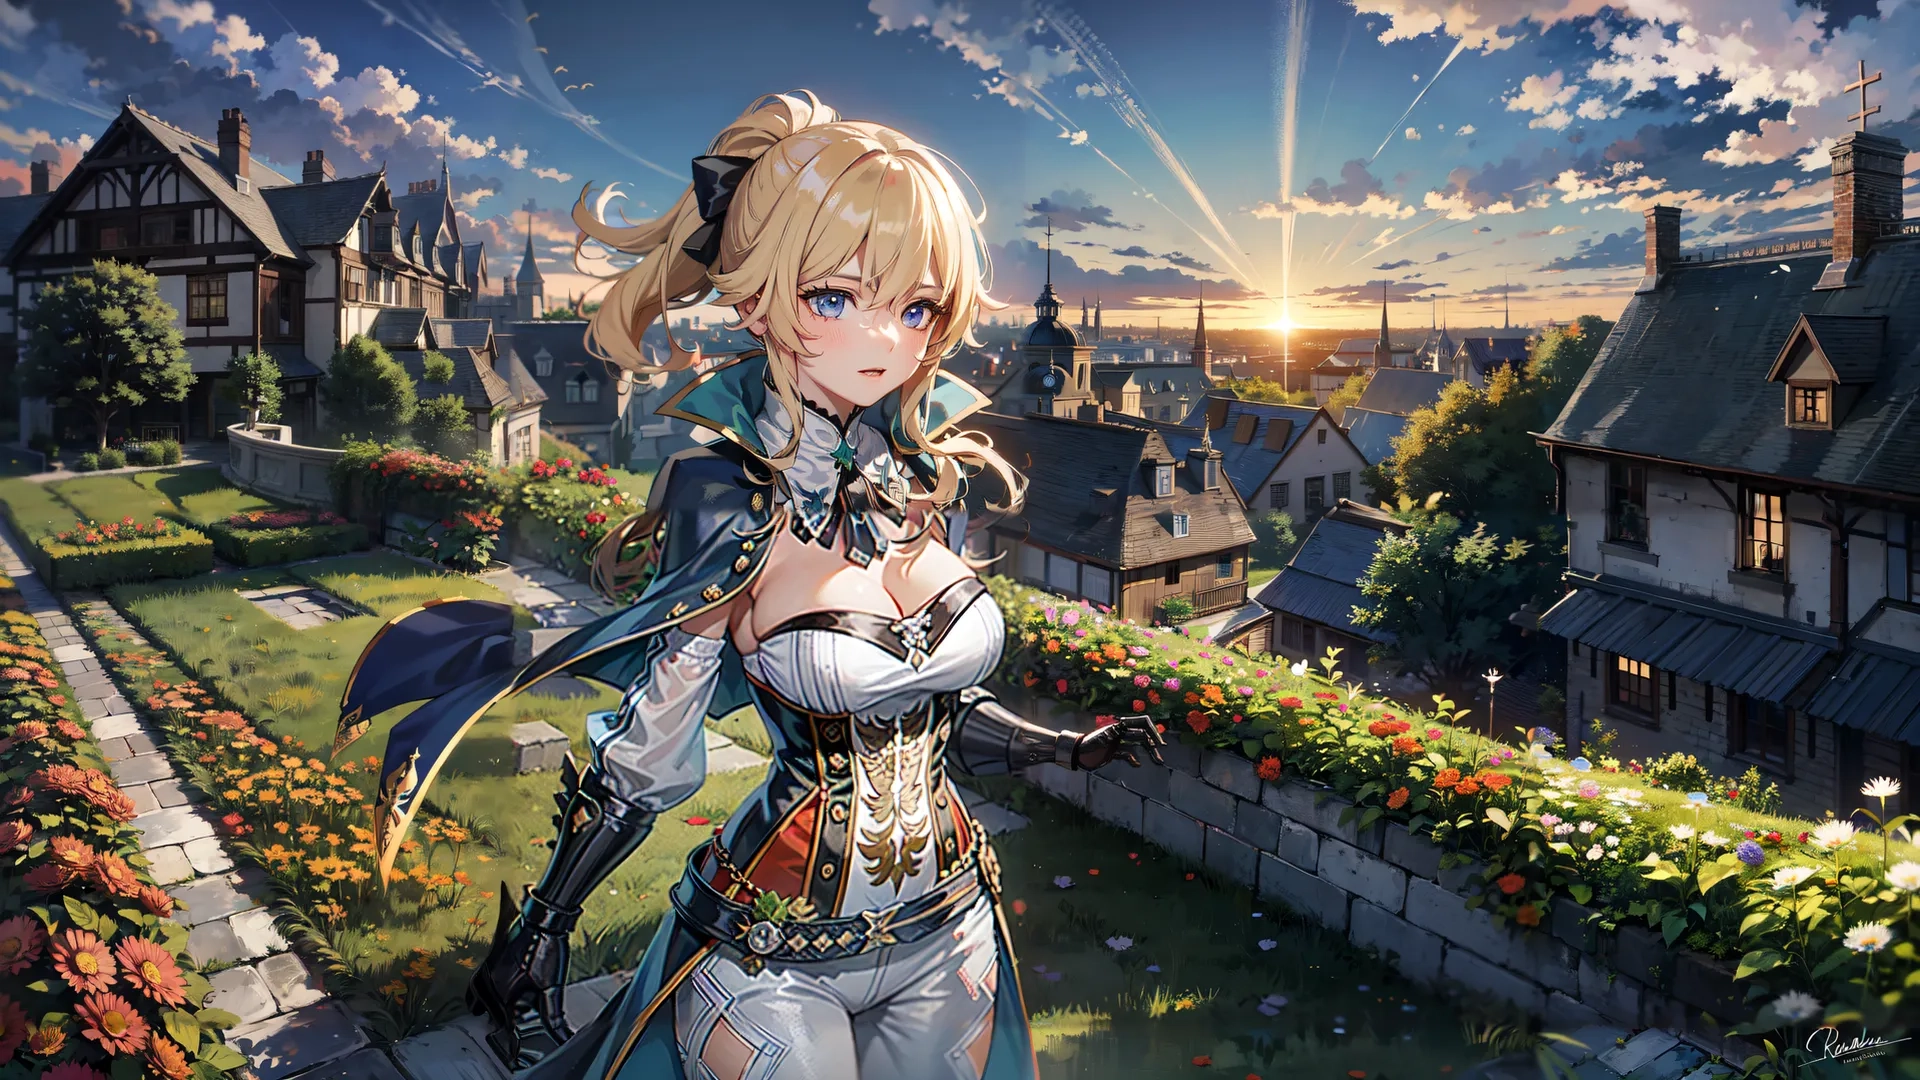 a beautiful woman holding a sword standing next to tall buildings near flowers and plants with mountains in the background in anime style style by tf
